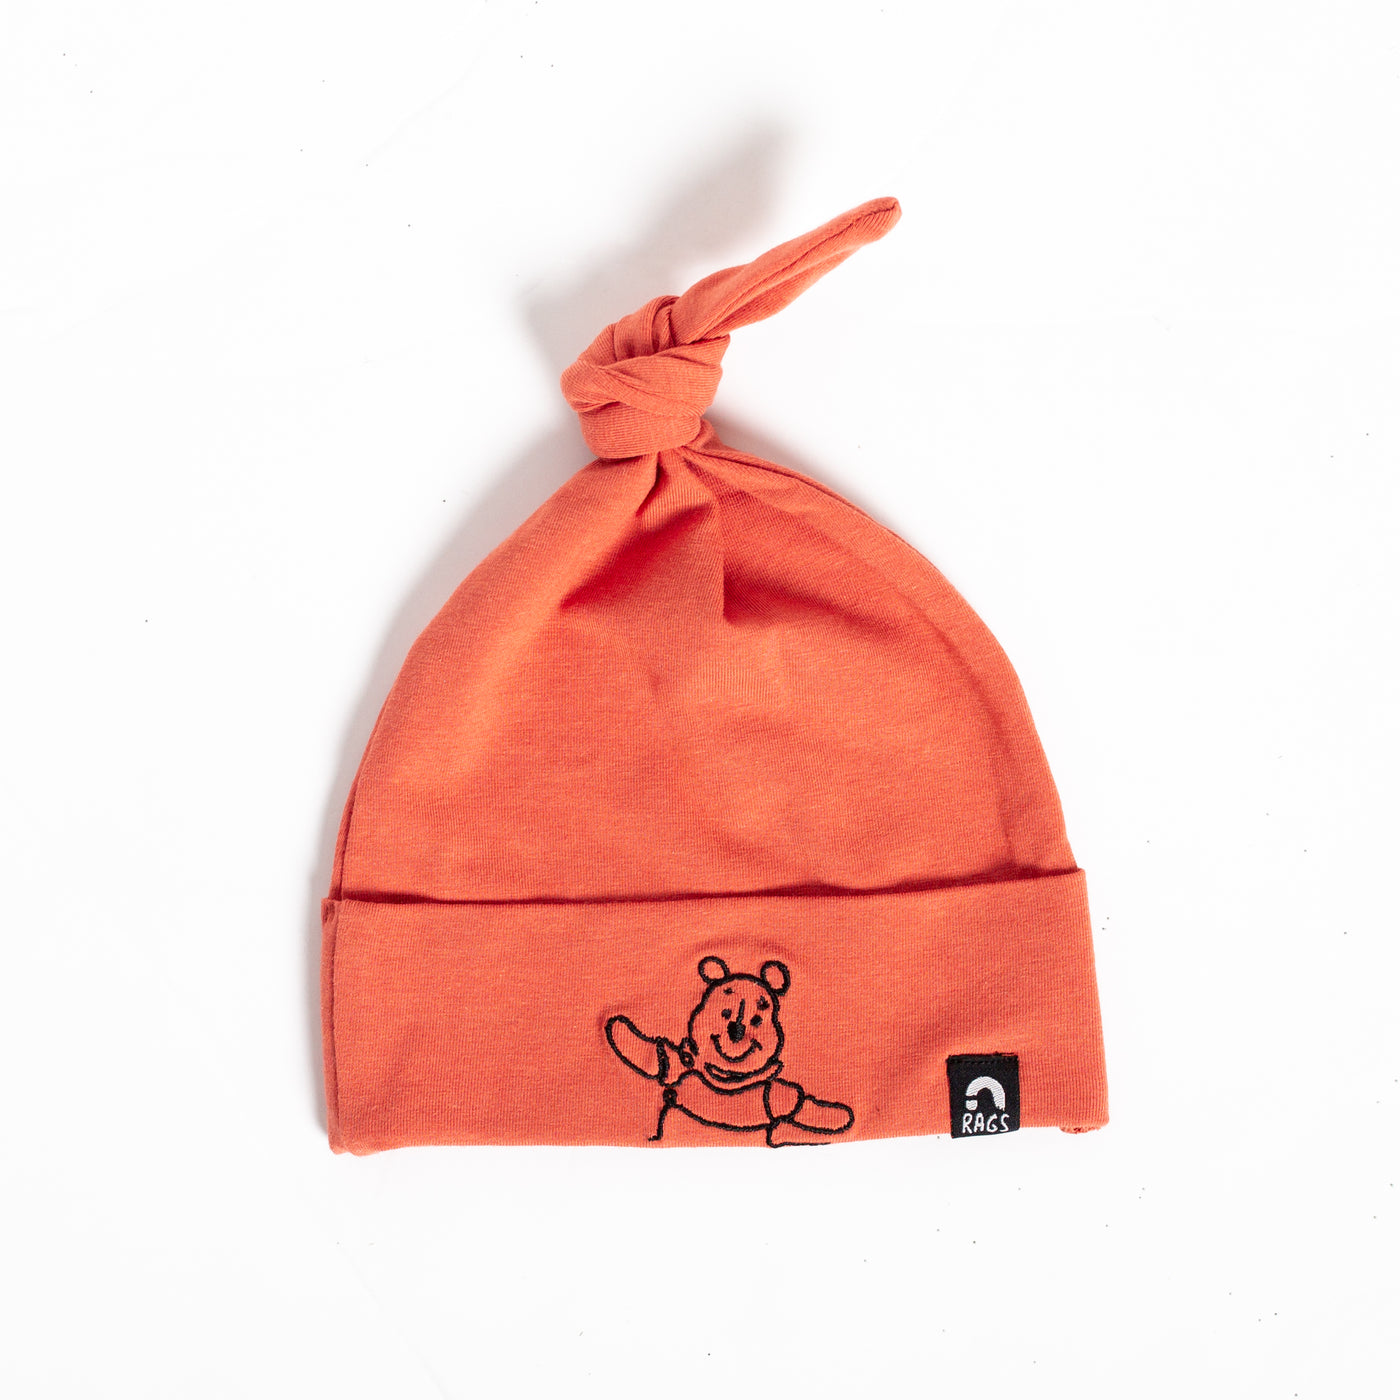 Top Knot Baby Hat - 'Embroidered Winnie the Pooh (FINAL SALE)' - Disney Collection from RAGS